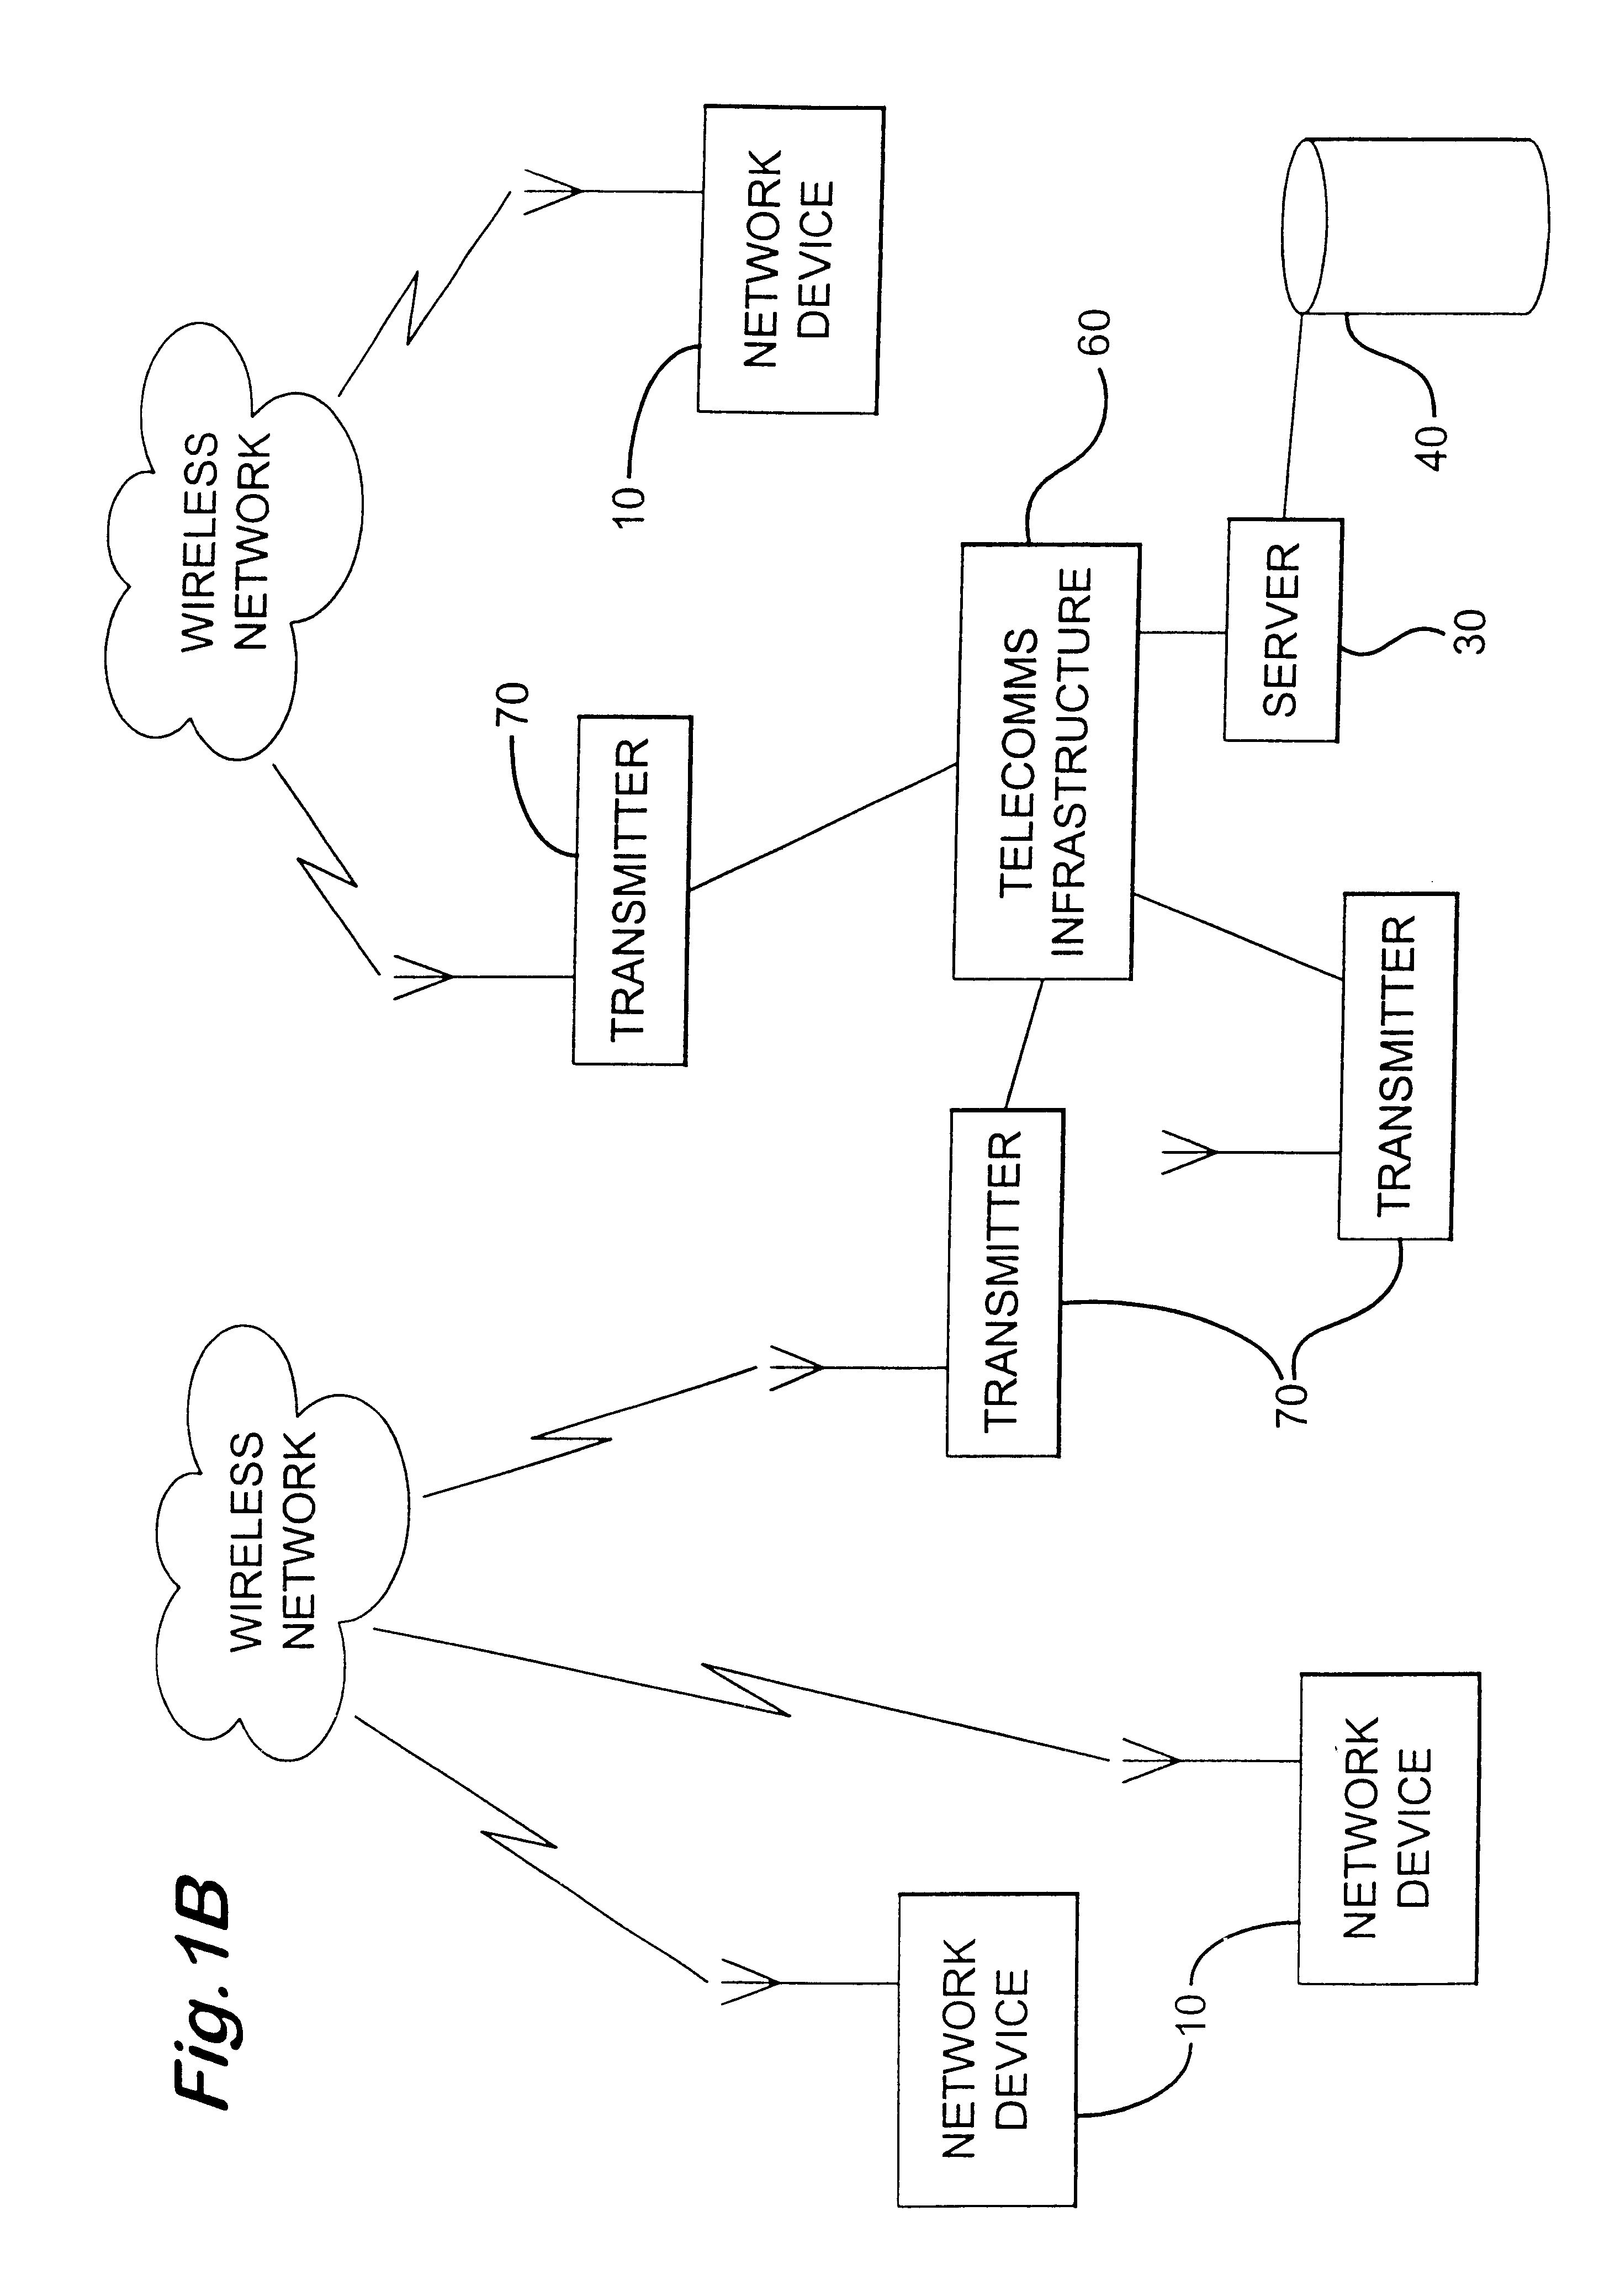 System and method for managing distribution of content to a device